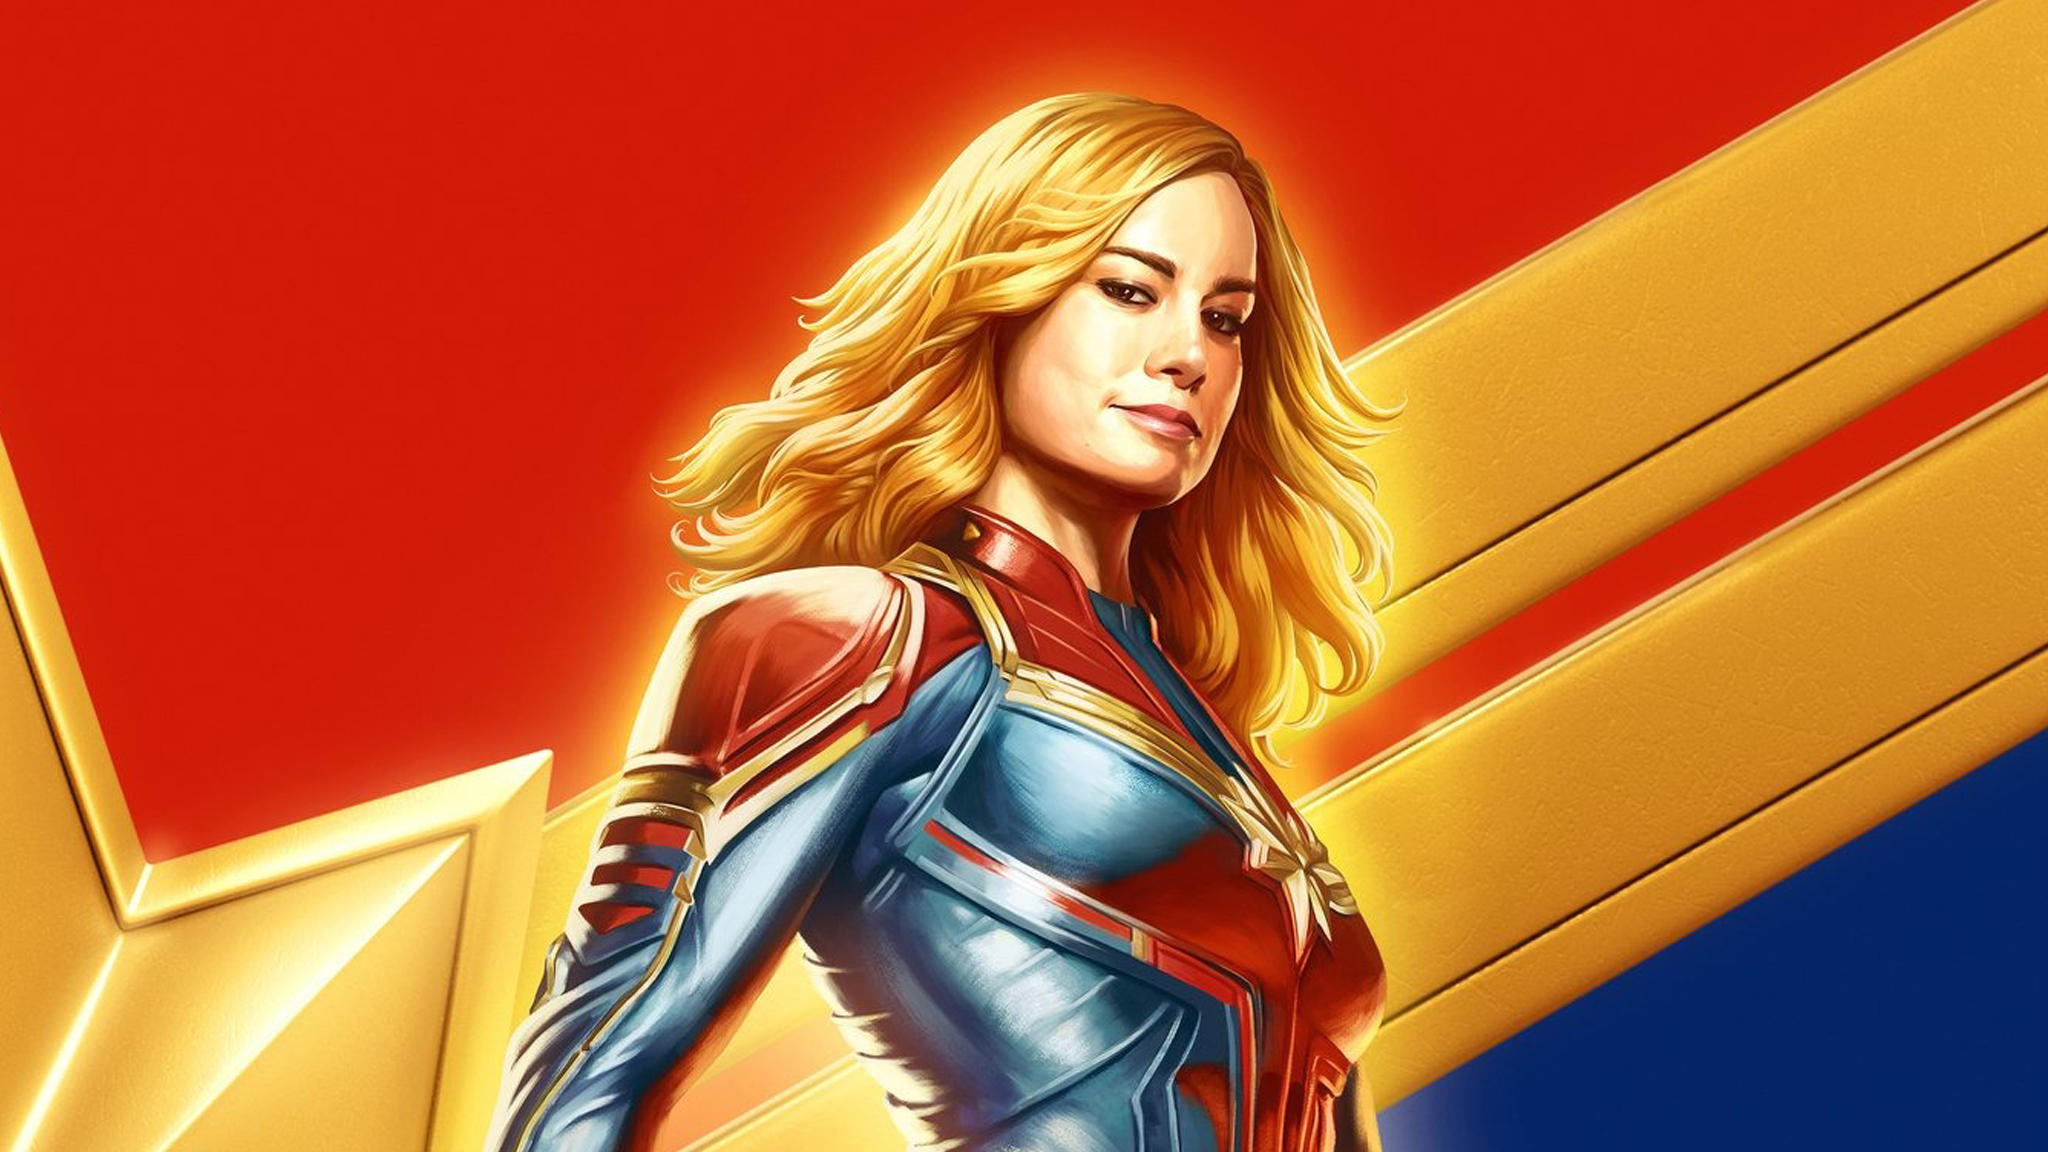 Captain Marvel Brazil Comic Con Poster, HD Movies, 4k Wallpapers